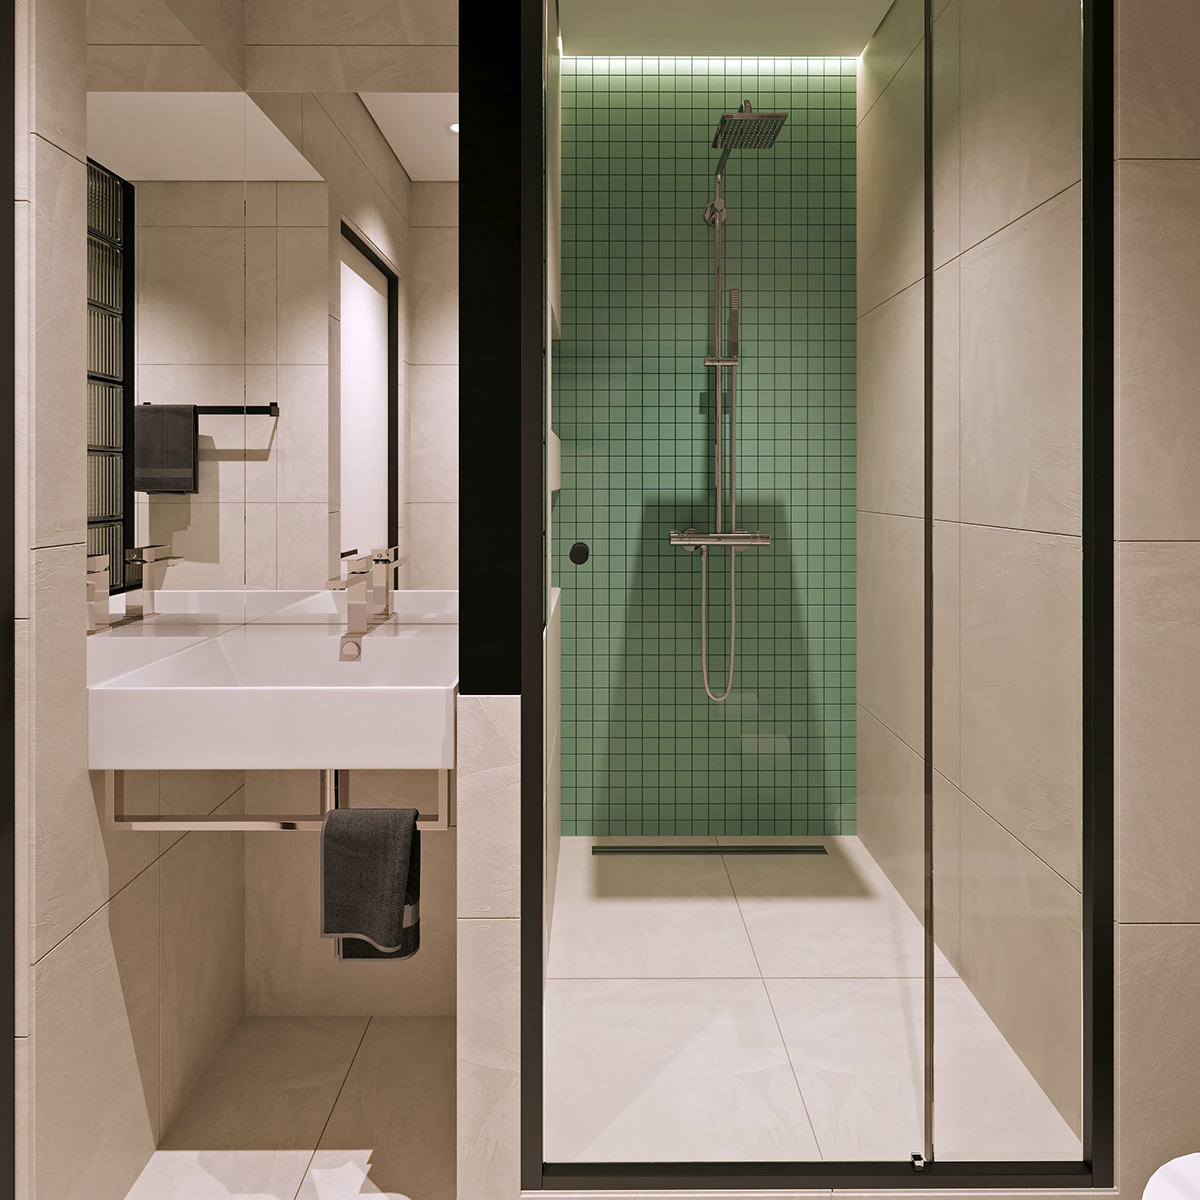 The bathroom space is entirely covered in ceramic tiles, which creates uniformity, fantastic waterproofing, and a natural feeling of coolness in accordance with the bathroom space.